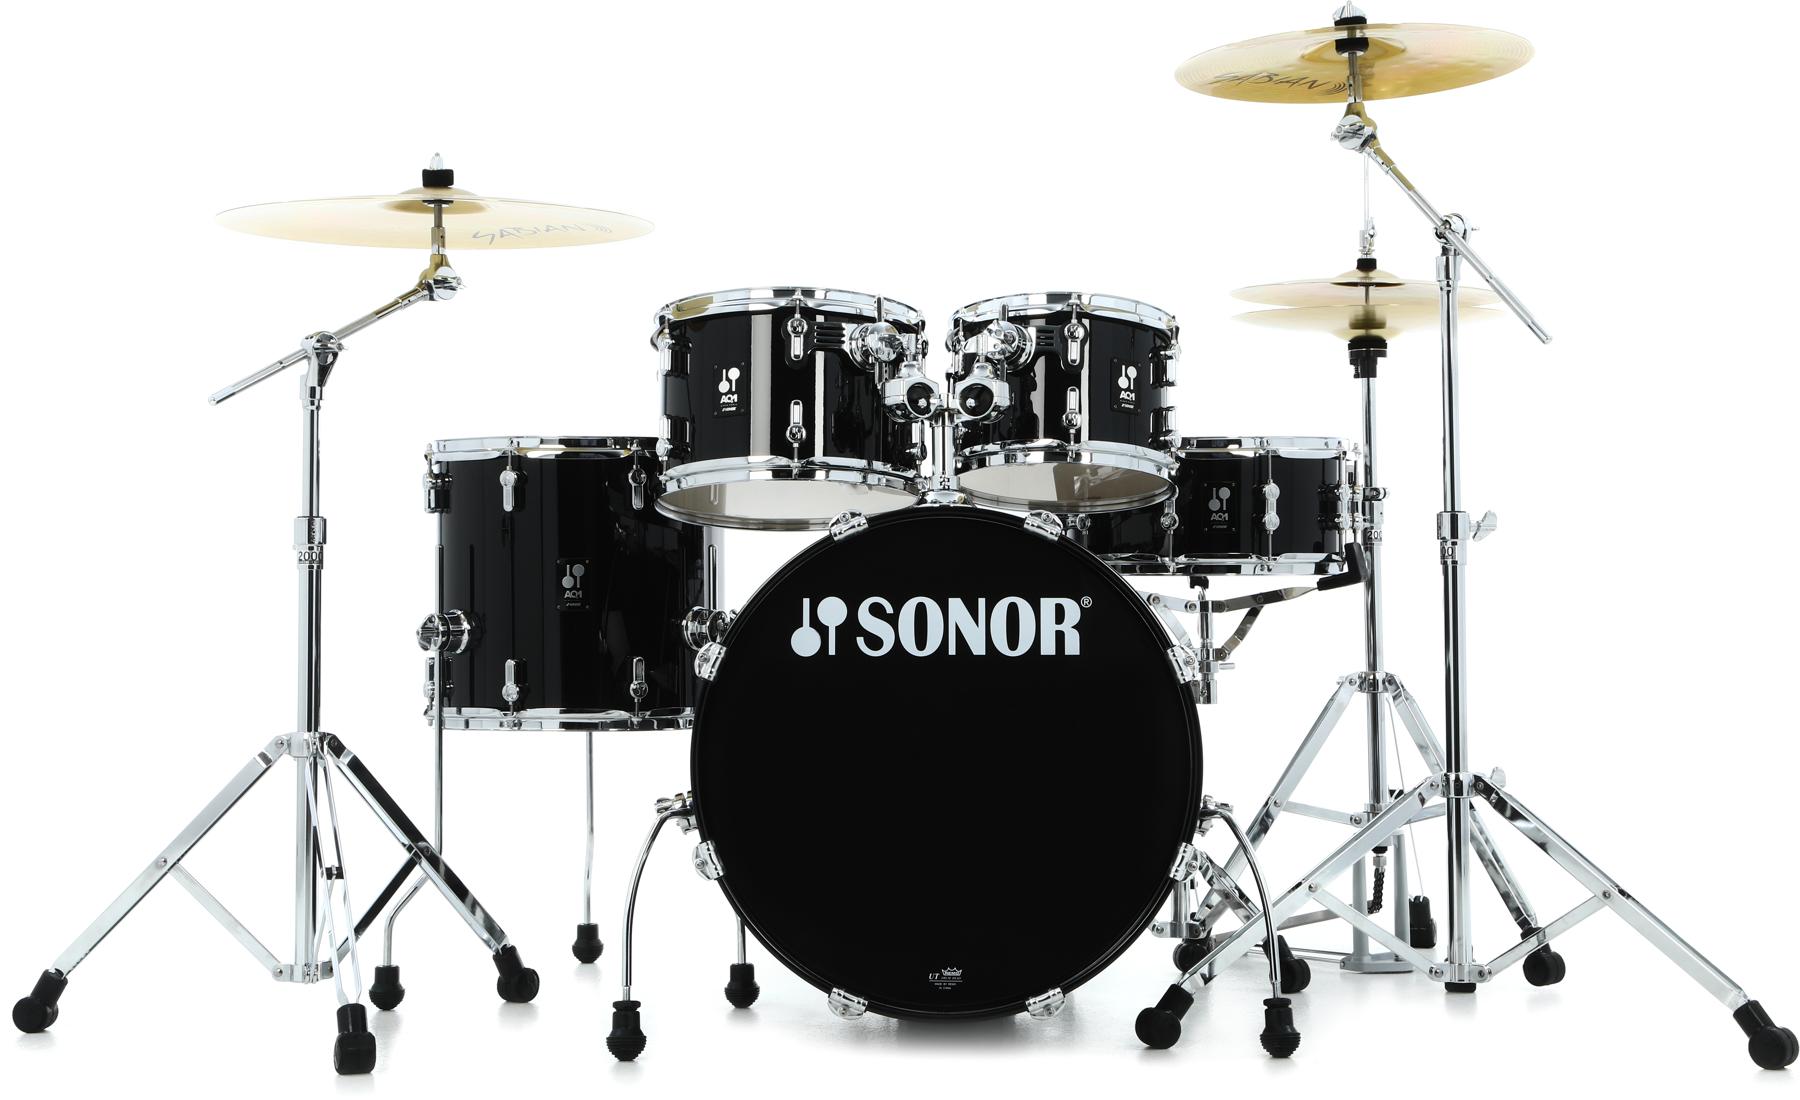 Sonor AQ1 Studio 5-piece Shell Pack with Hardware - Piano Black